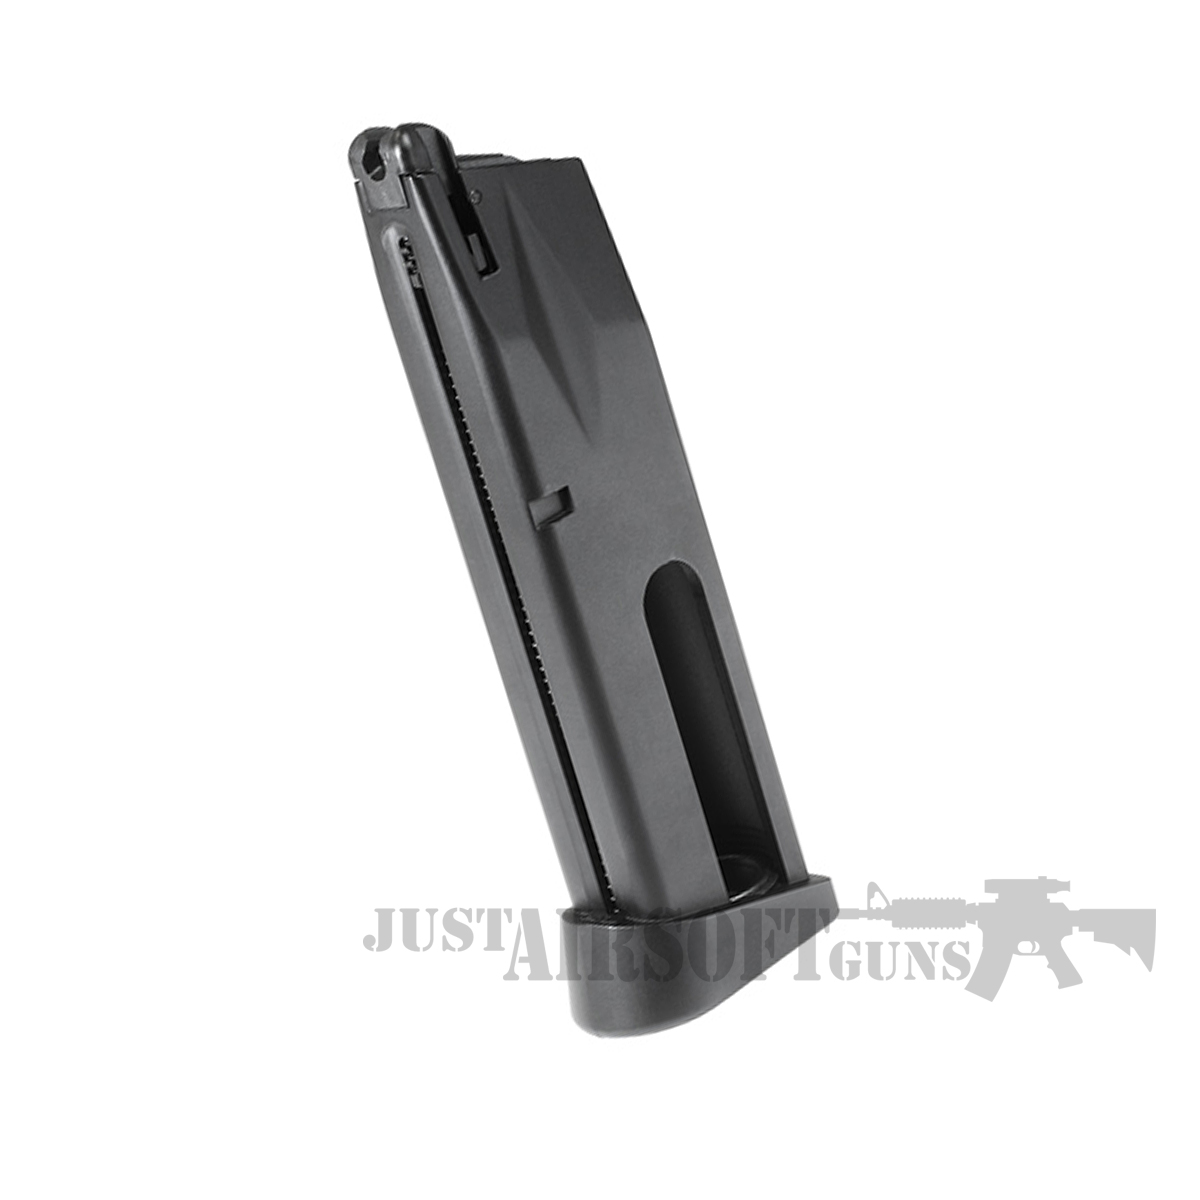 Swiss Arms 177 CO2 Powered Magazine for P92 – 288810 1